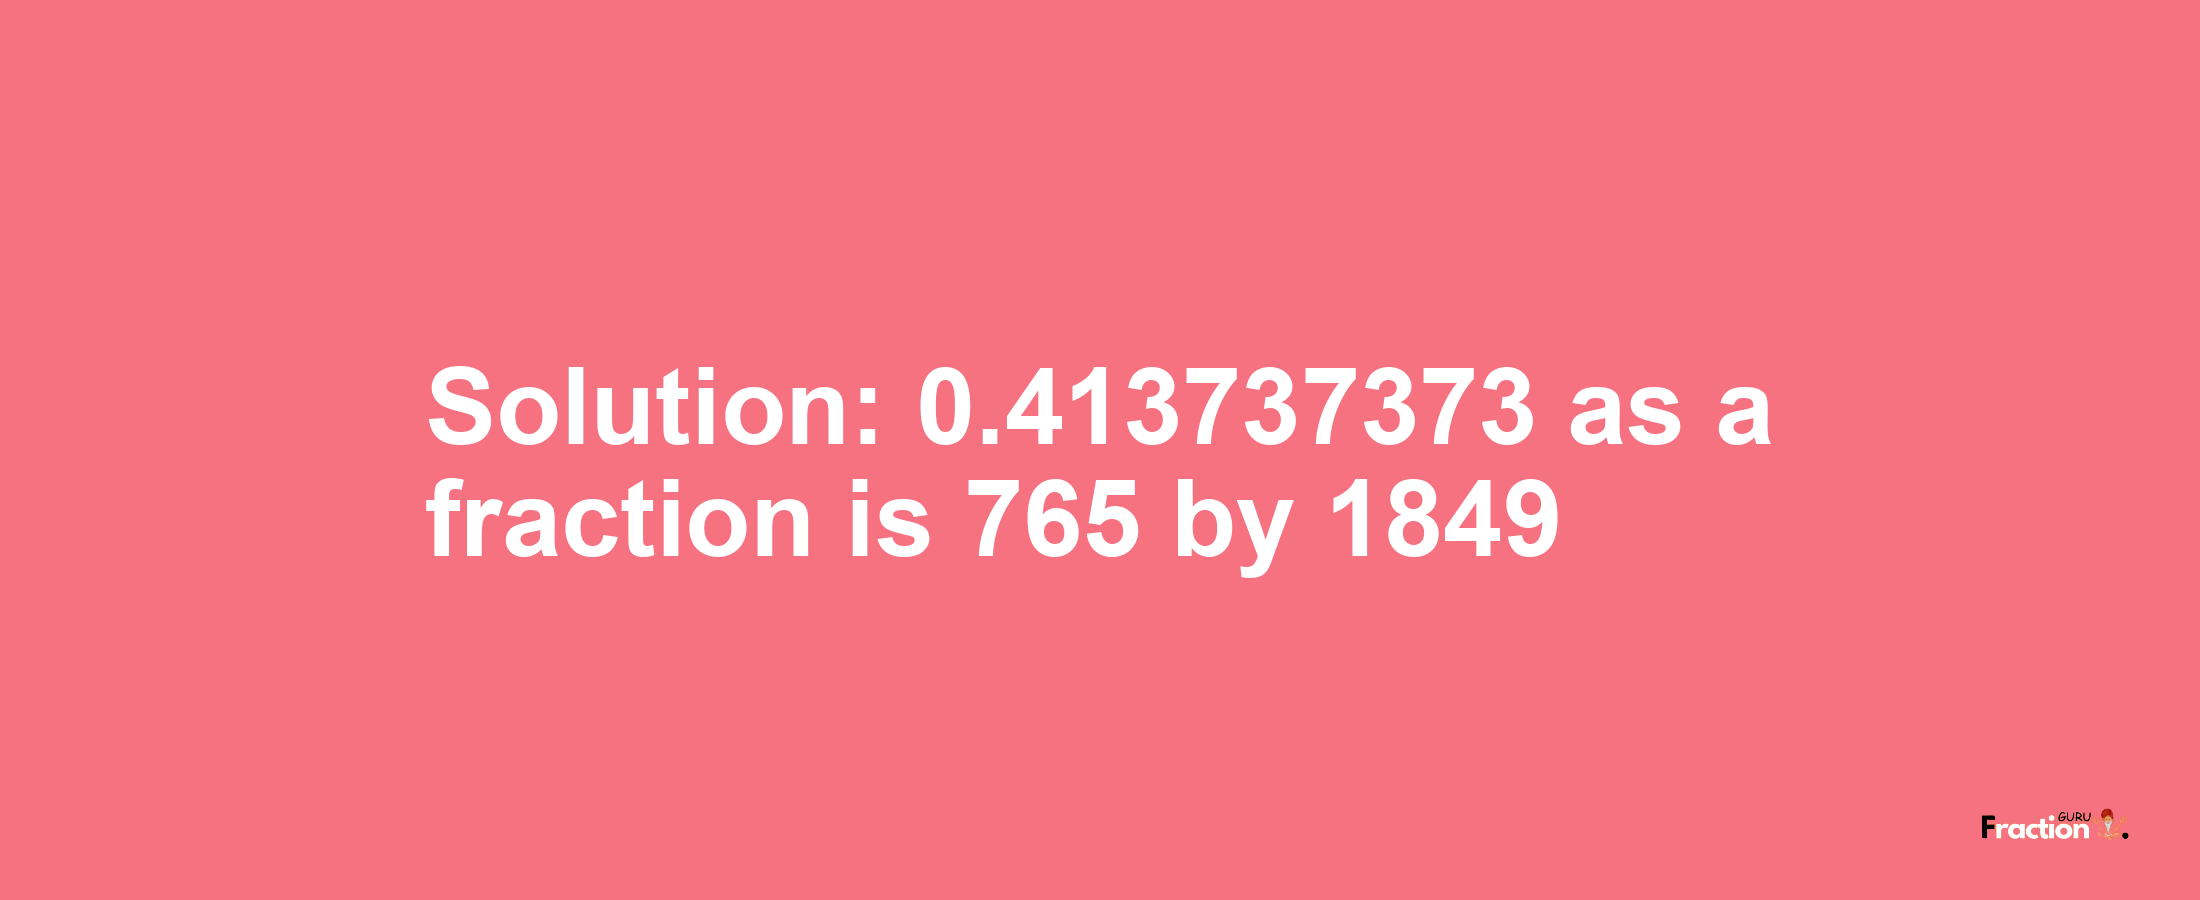 Solution:0.413737373 as a fraction is 765/1849